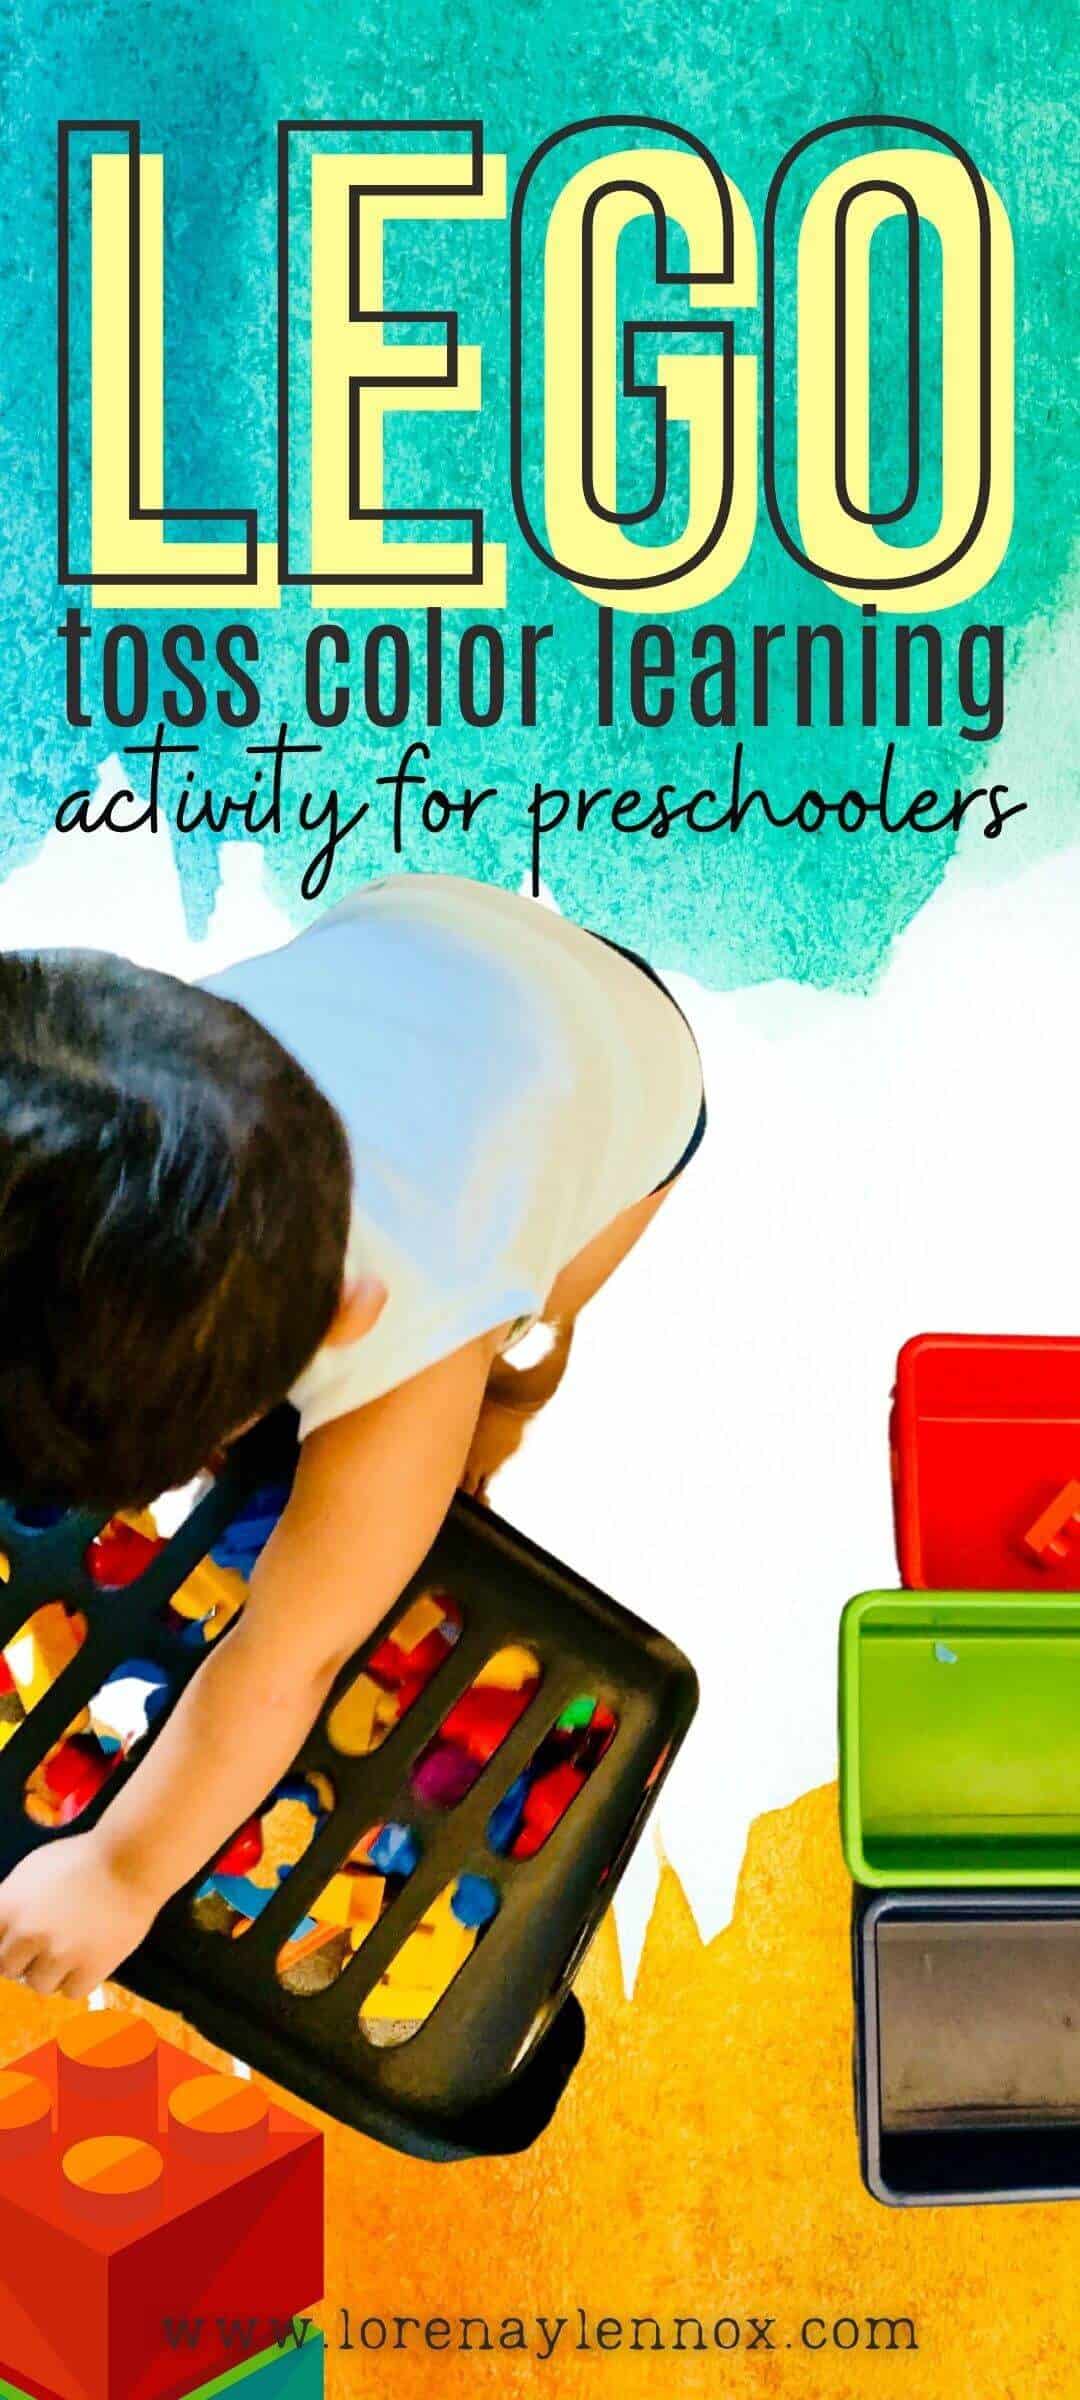 Lego Color Learning Activity